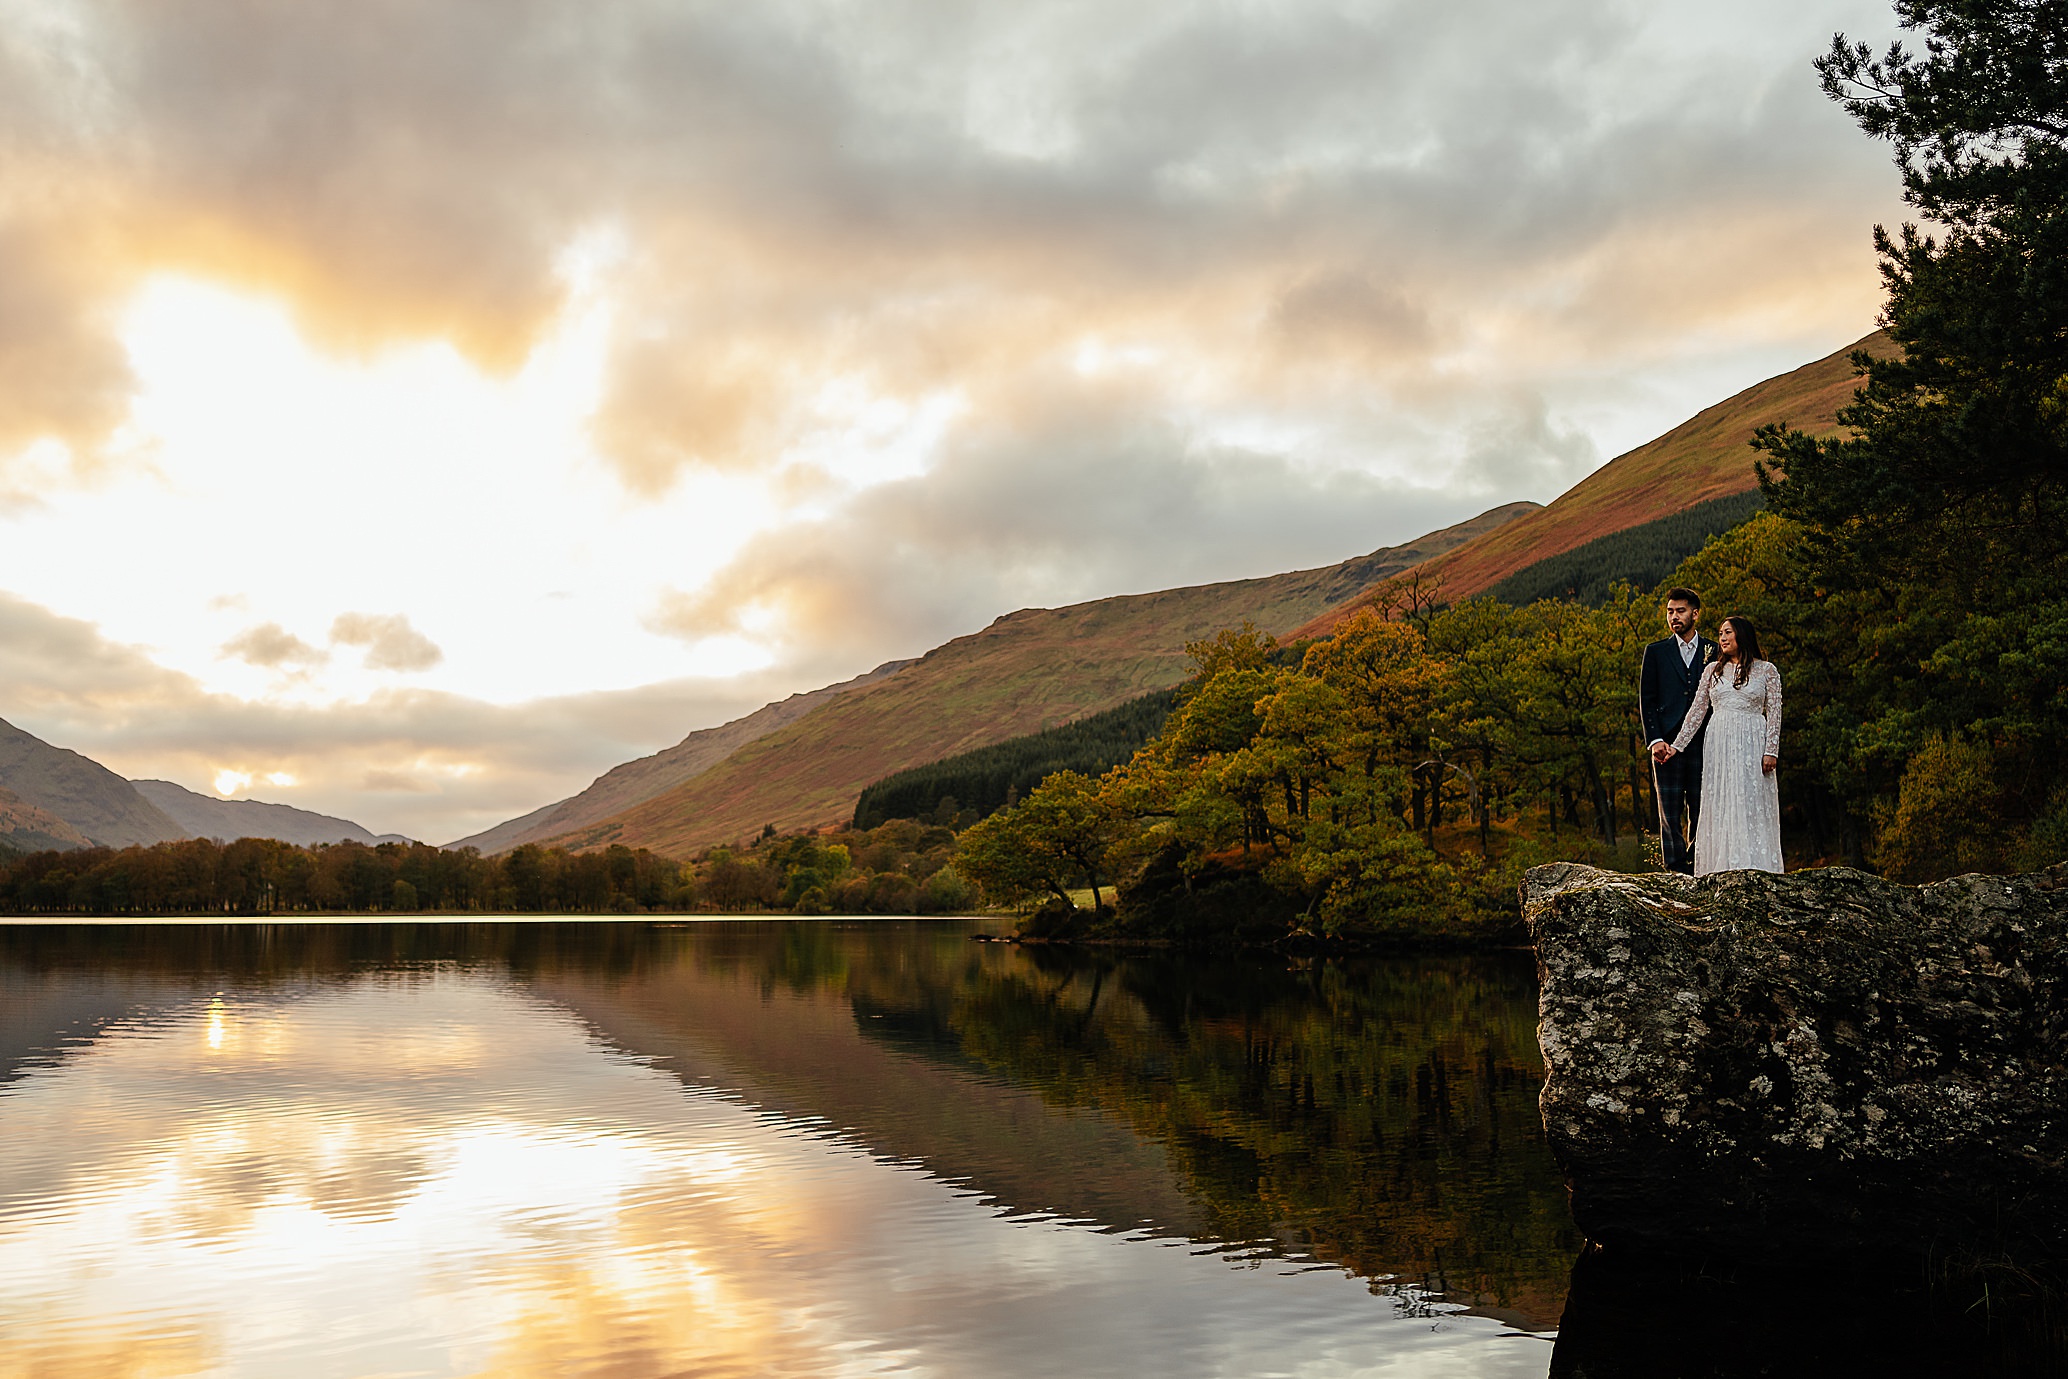 bride and groom standing on rock at side of loch holding hands as the sun sets green mountains in background monachyle mhor wedding photoshoot fotomaki photography